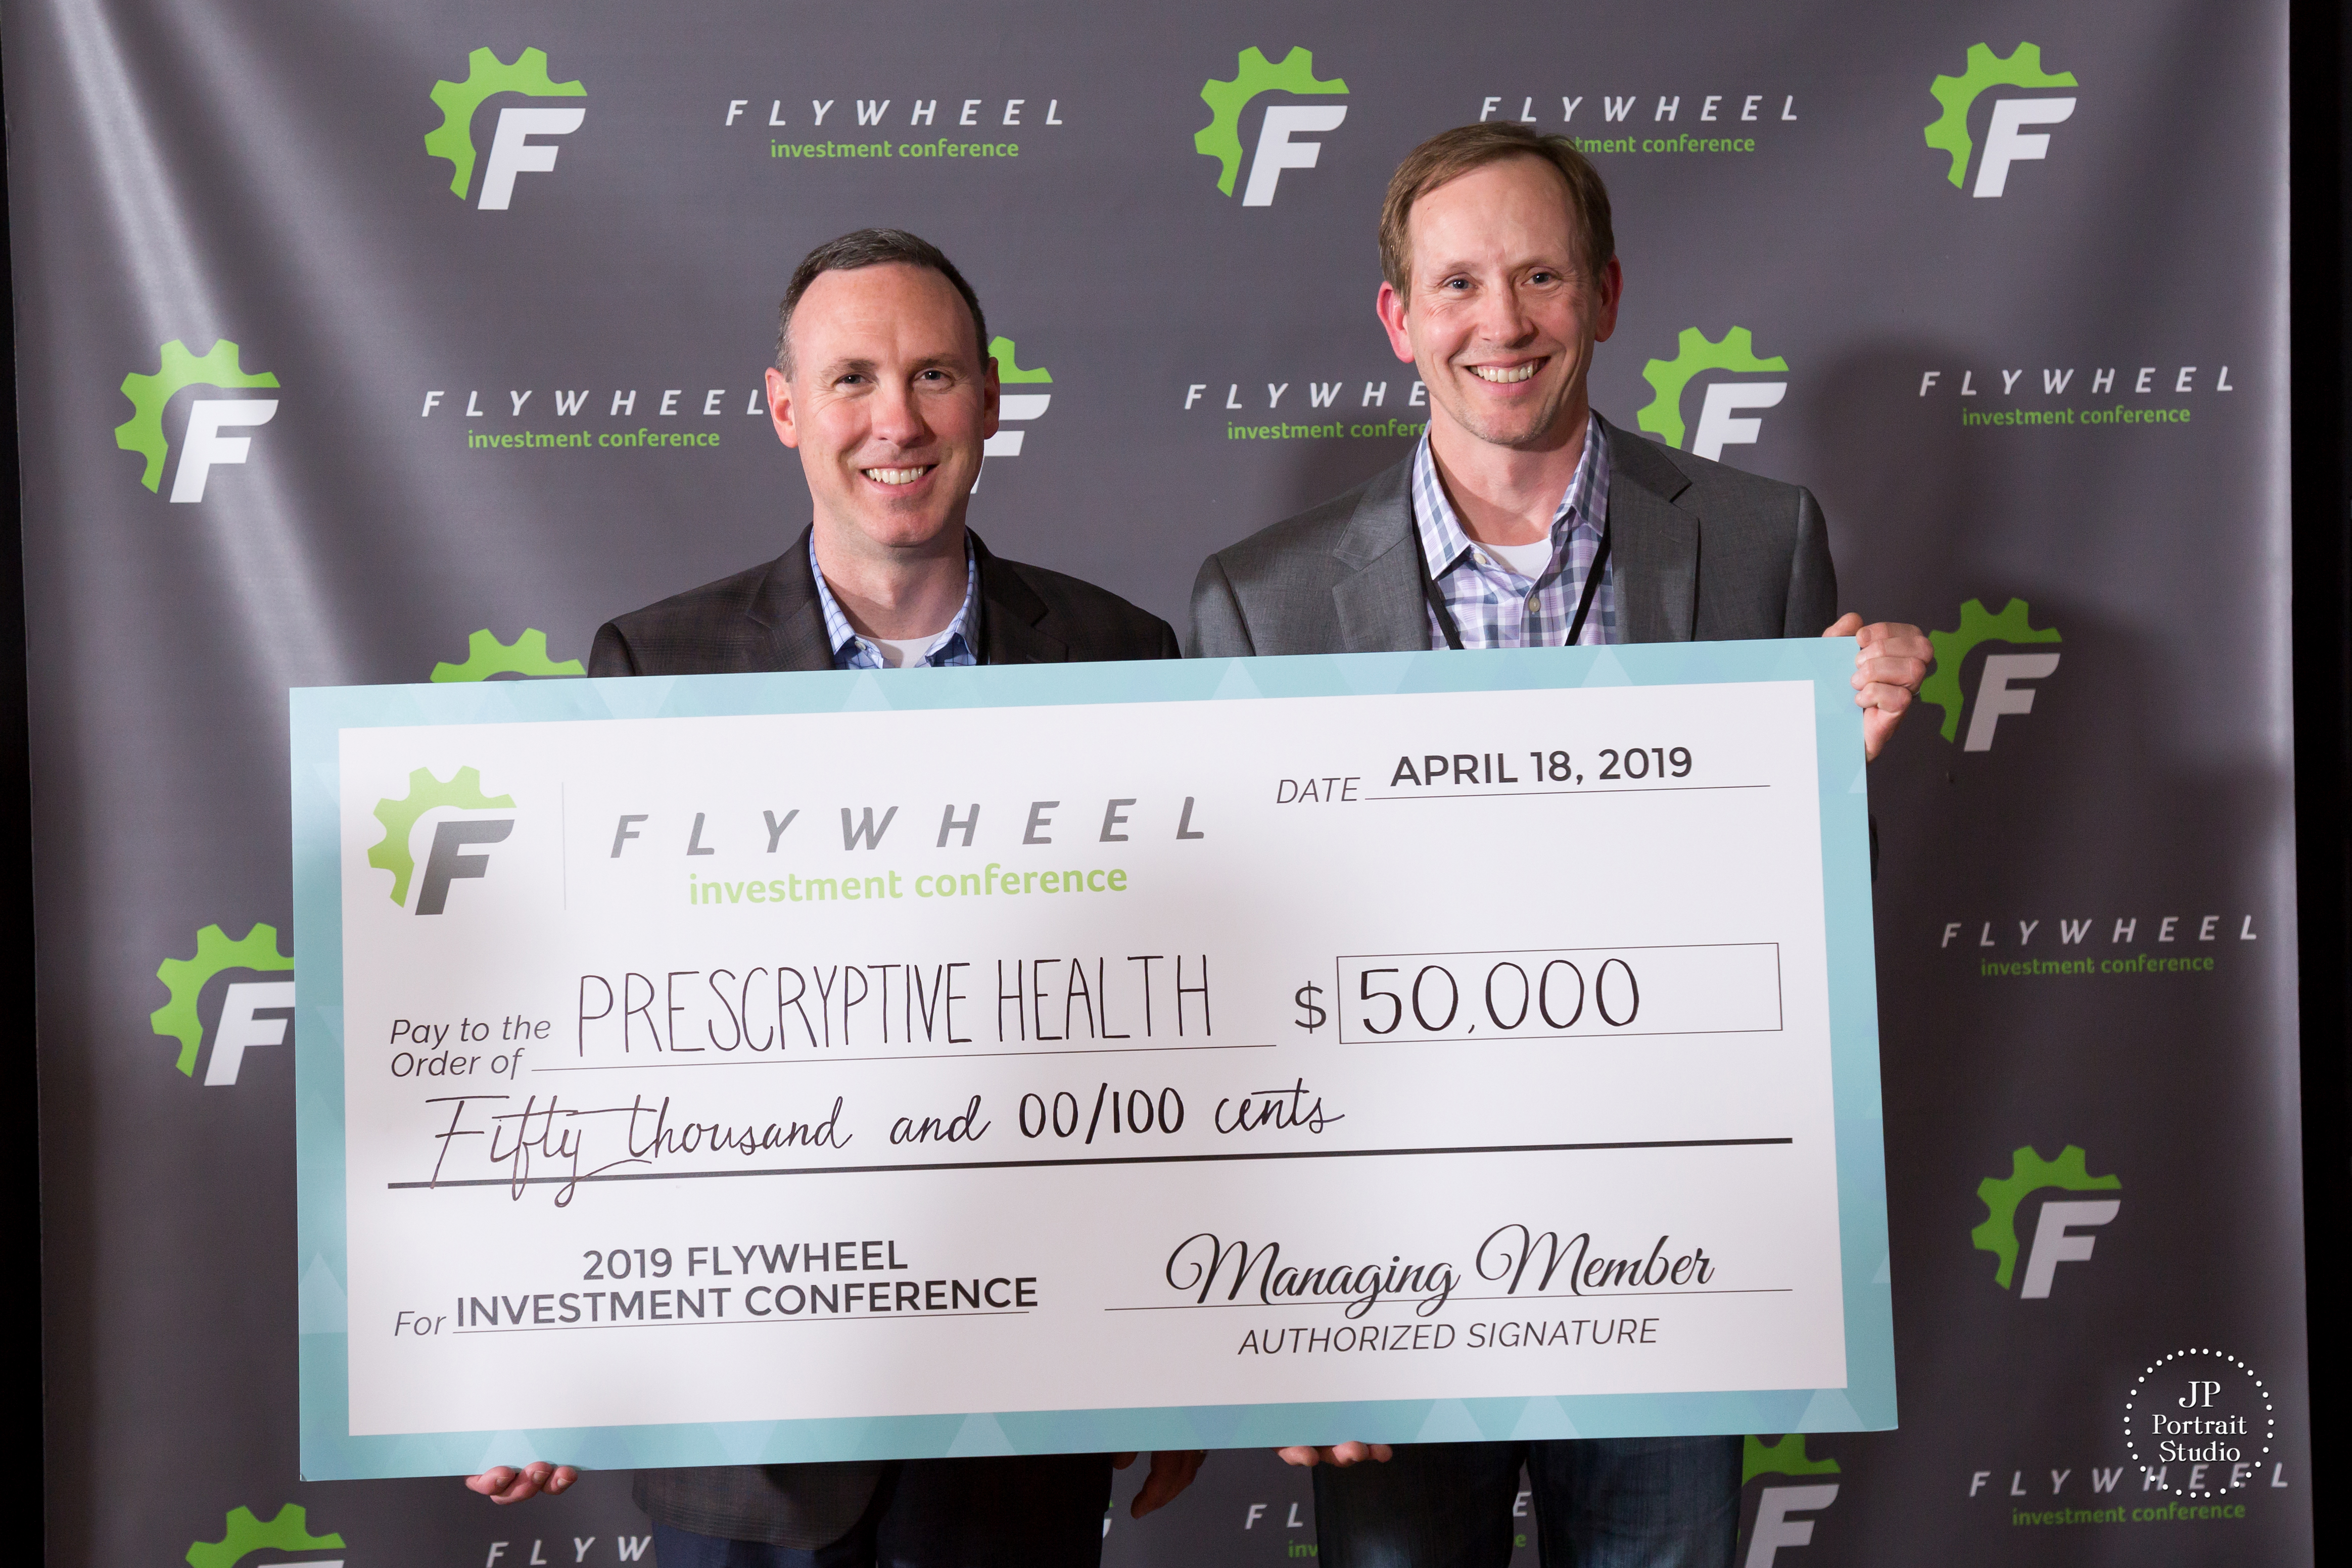 Image for $185,000 in Funding Awarded During he 2019 Flywheel Investment Conference